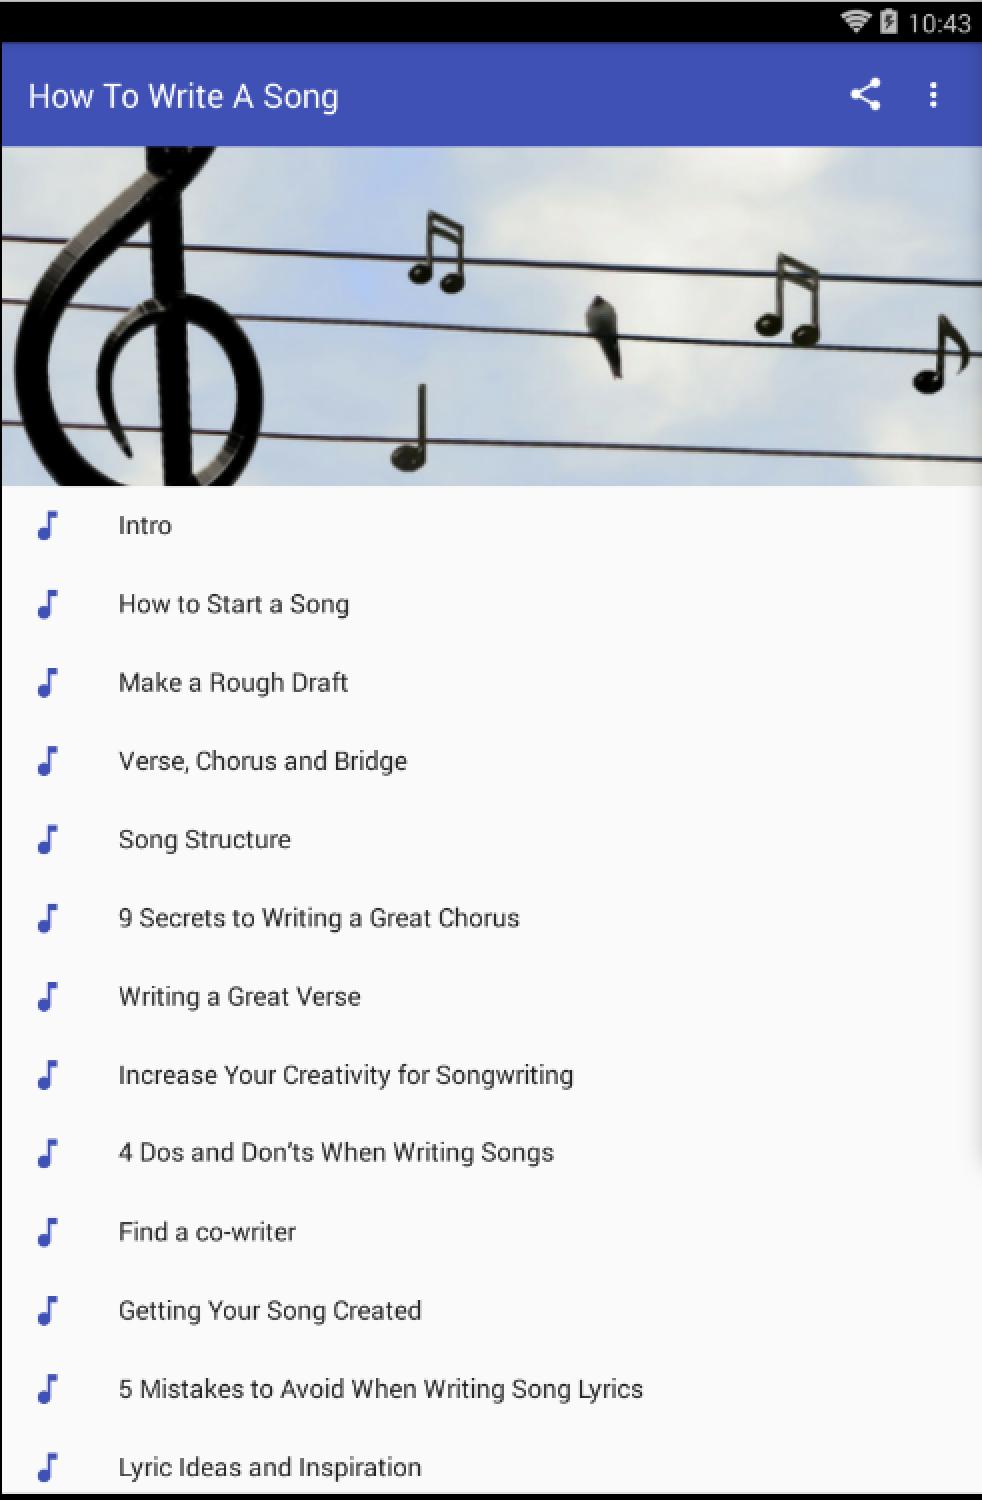 HOW TO WRITE A SONG for Android - APK Download